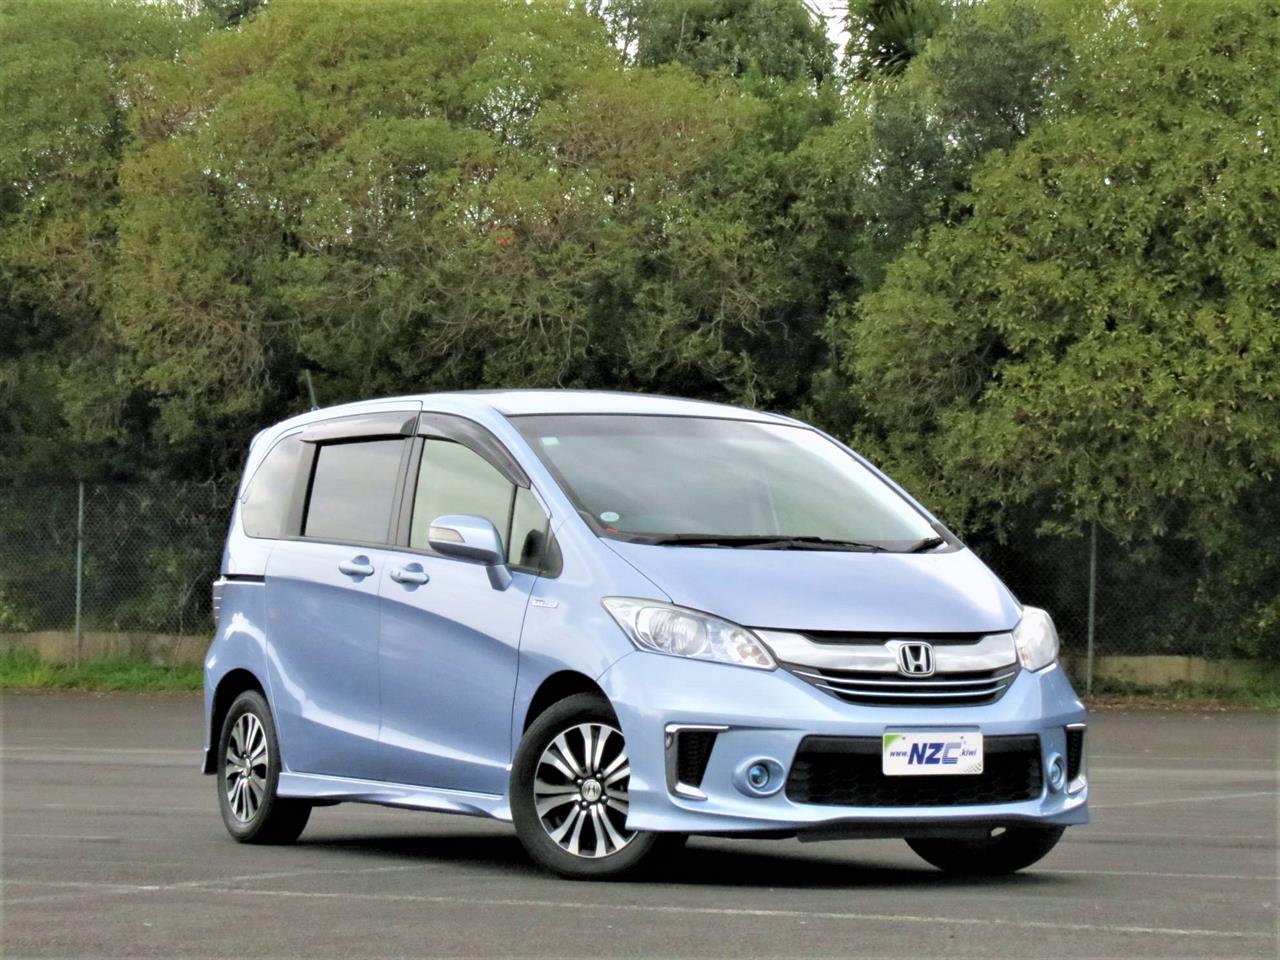 NZC best hot price for 2015 Honda Freed in Auckland